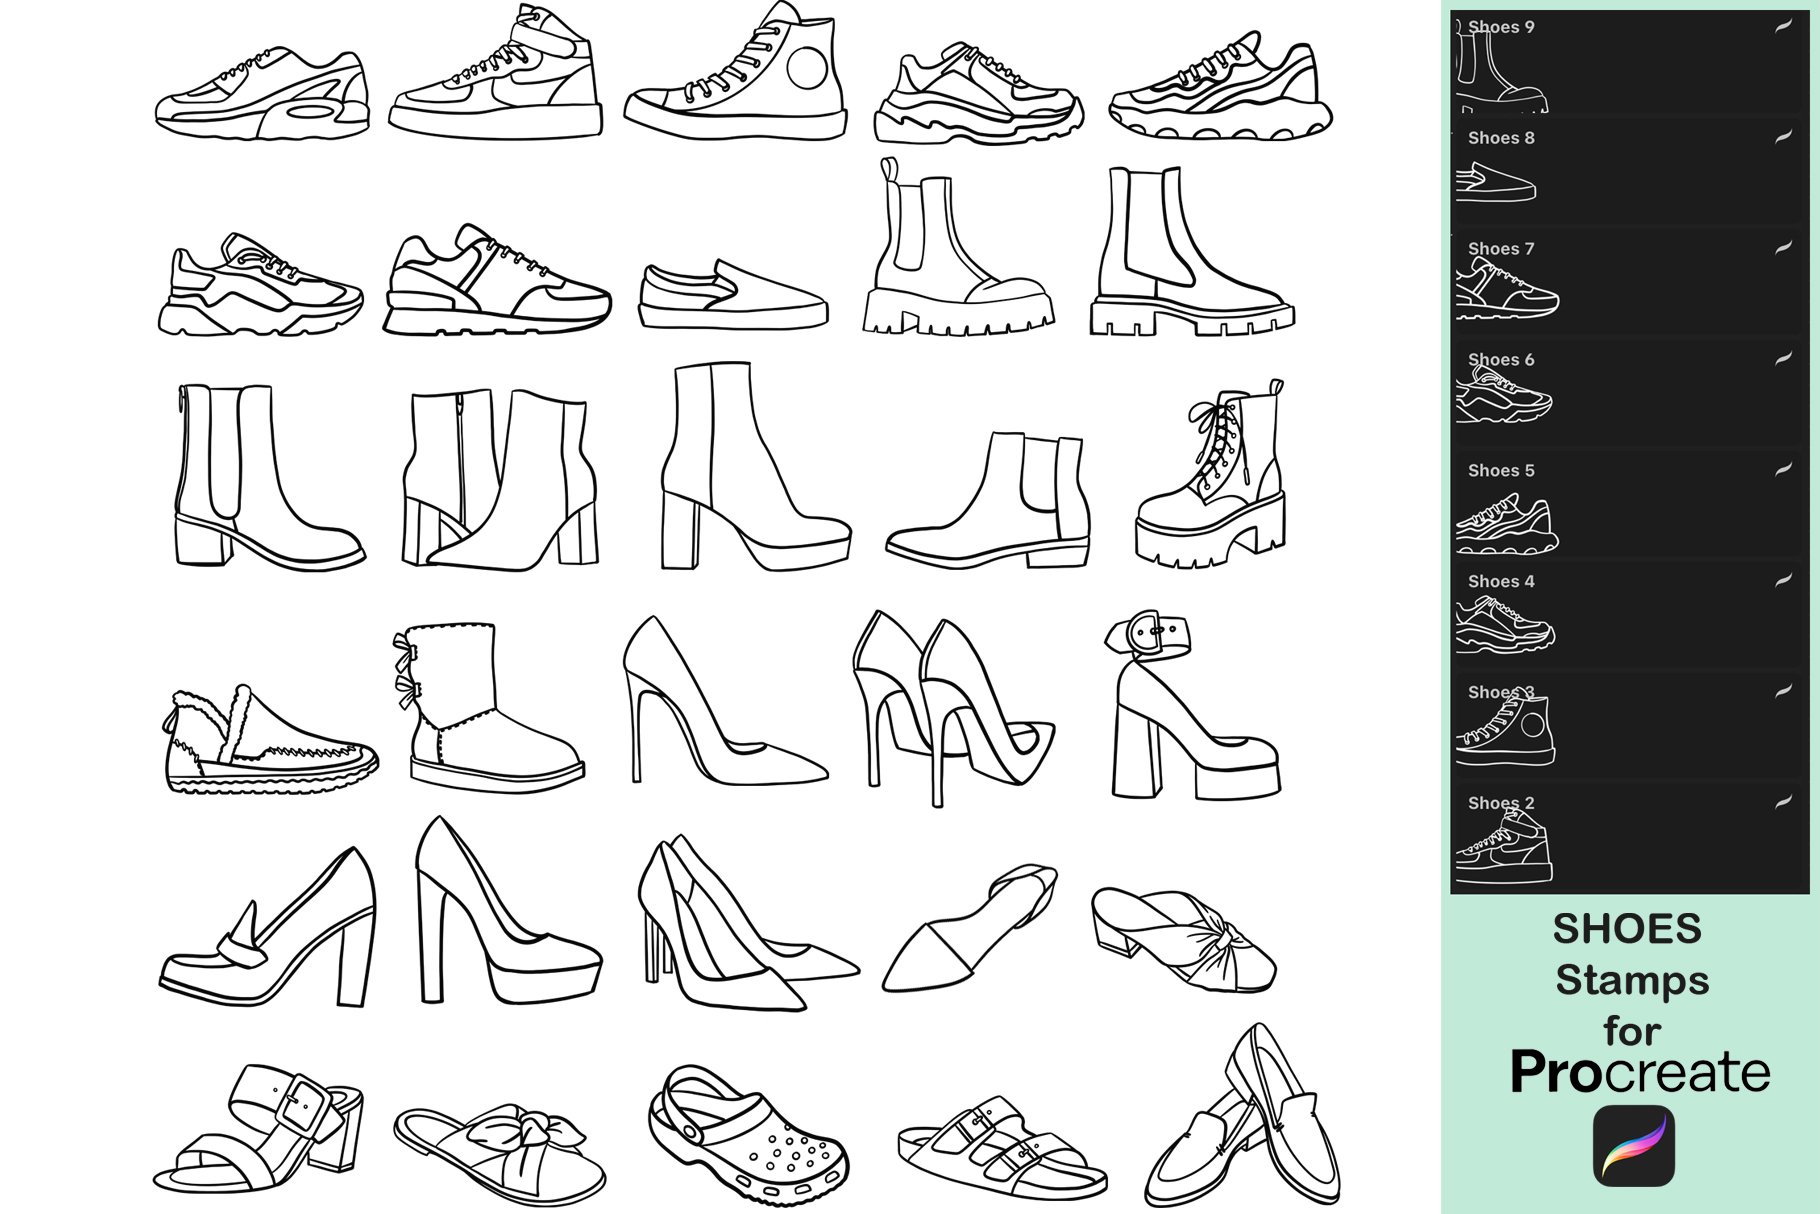 30 Shoes Stamps for Procreatepreview image.